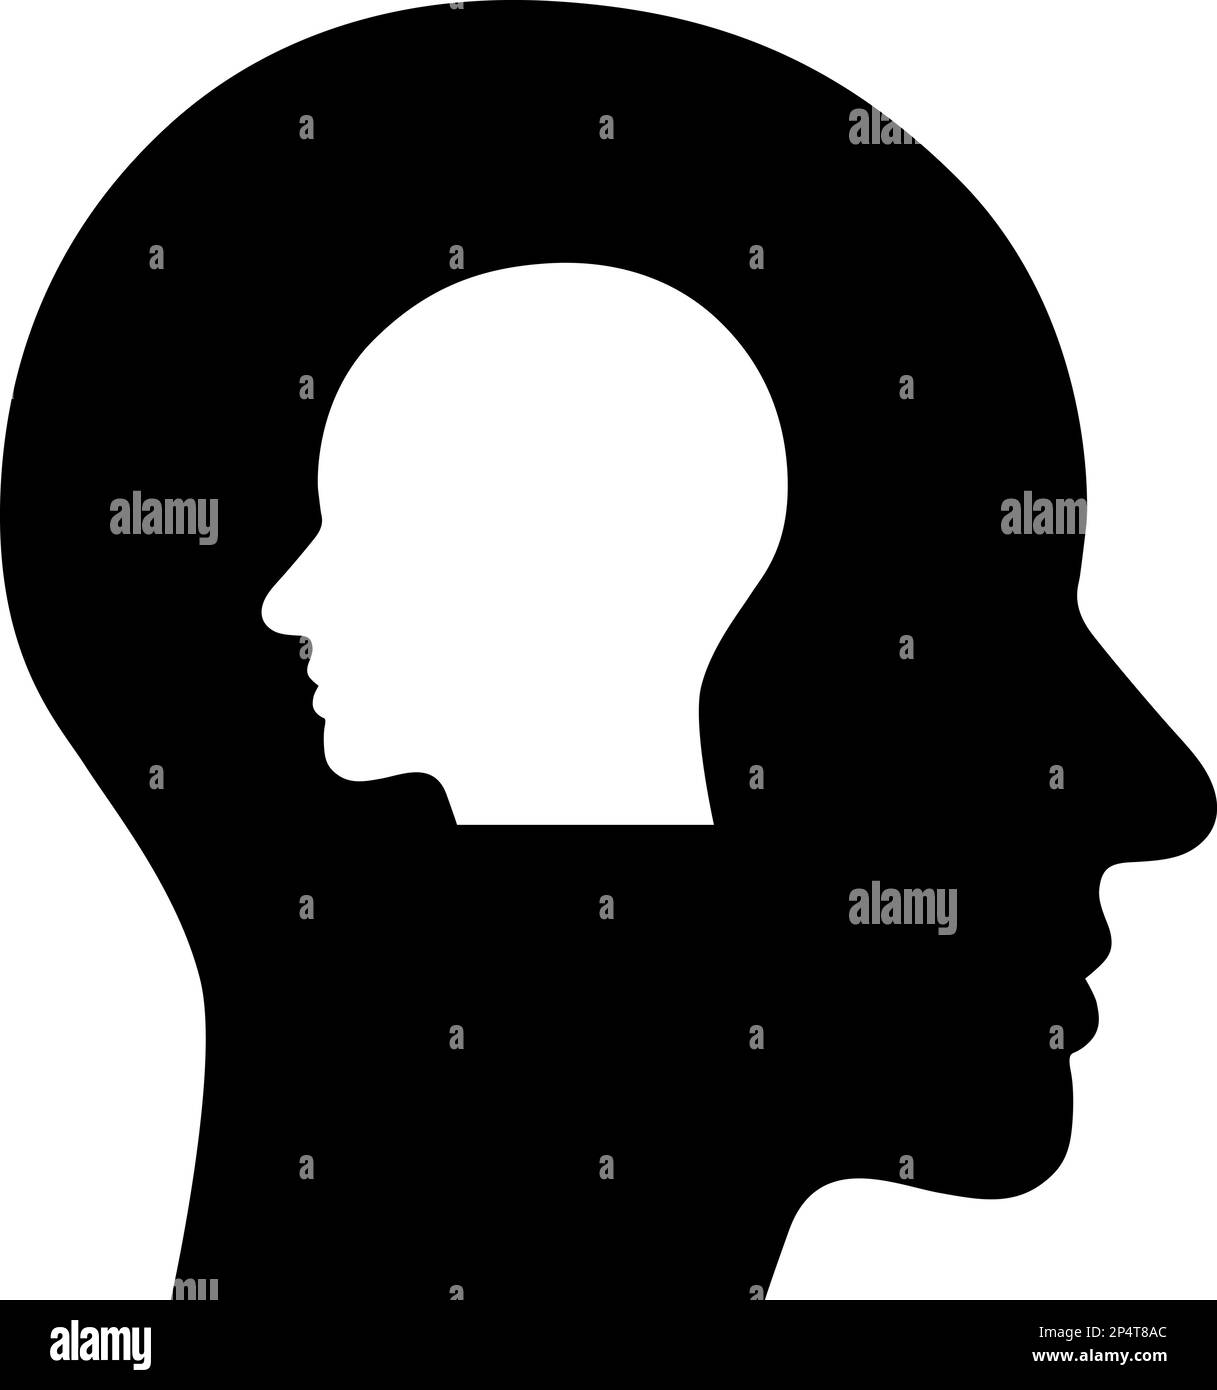 Flat icon of head silhouette in head silhouette as a concept of inner confrontation Stock Vector